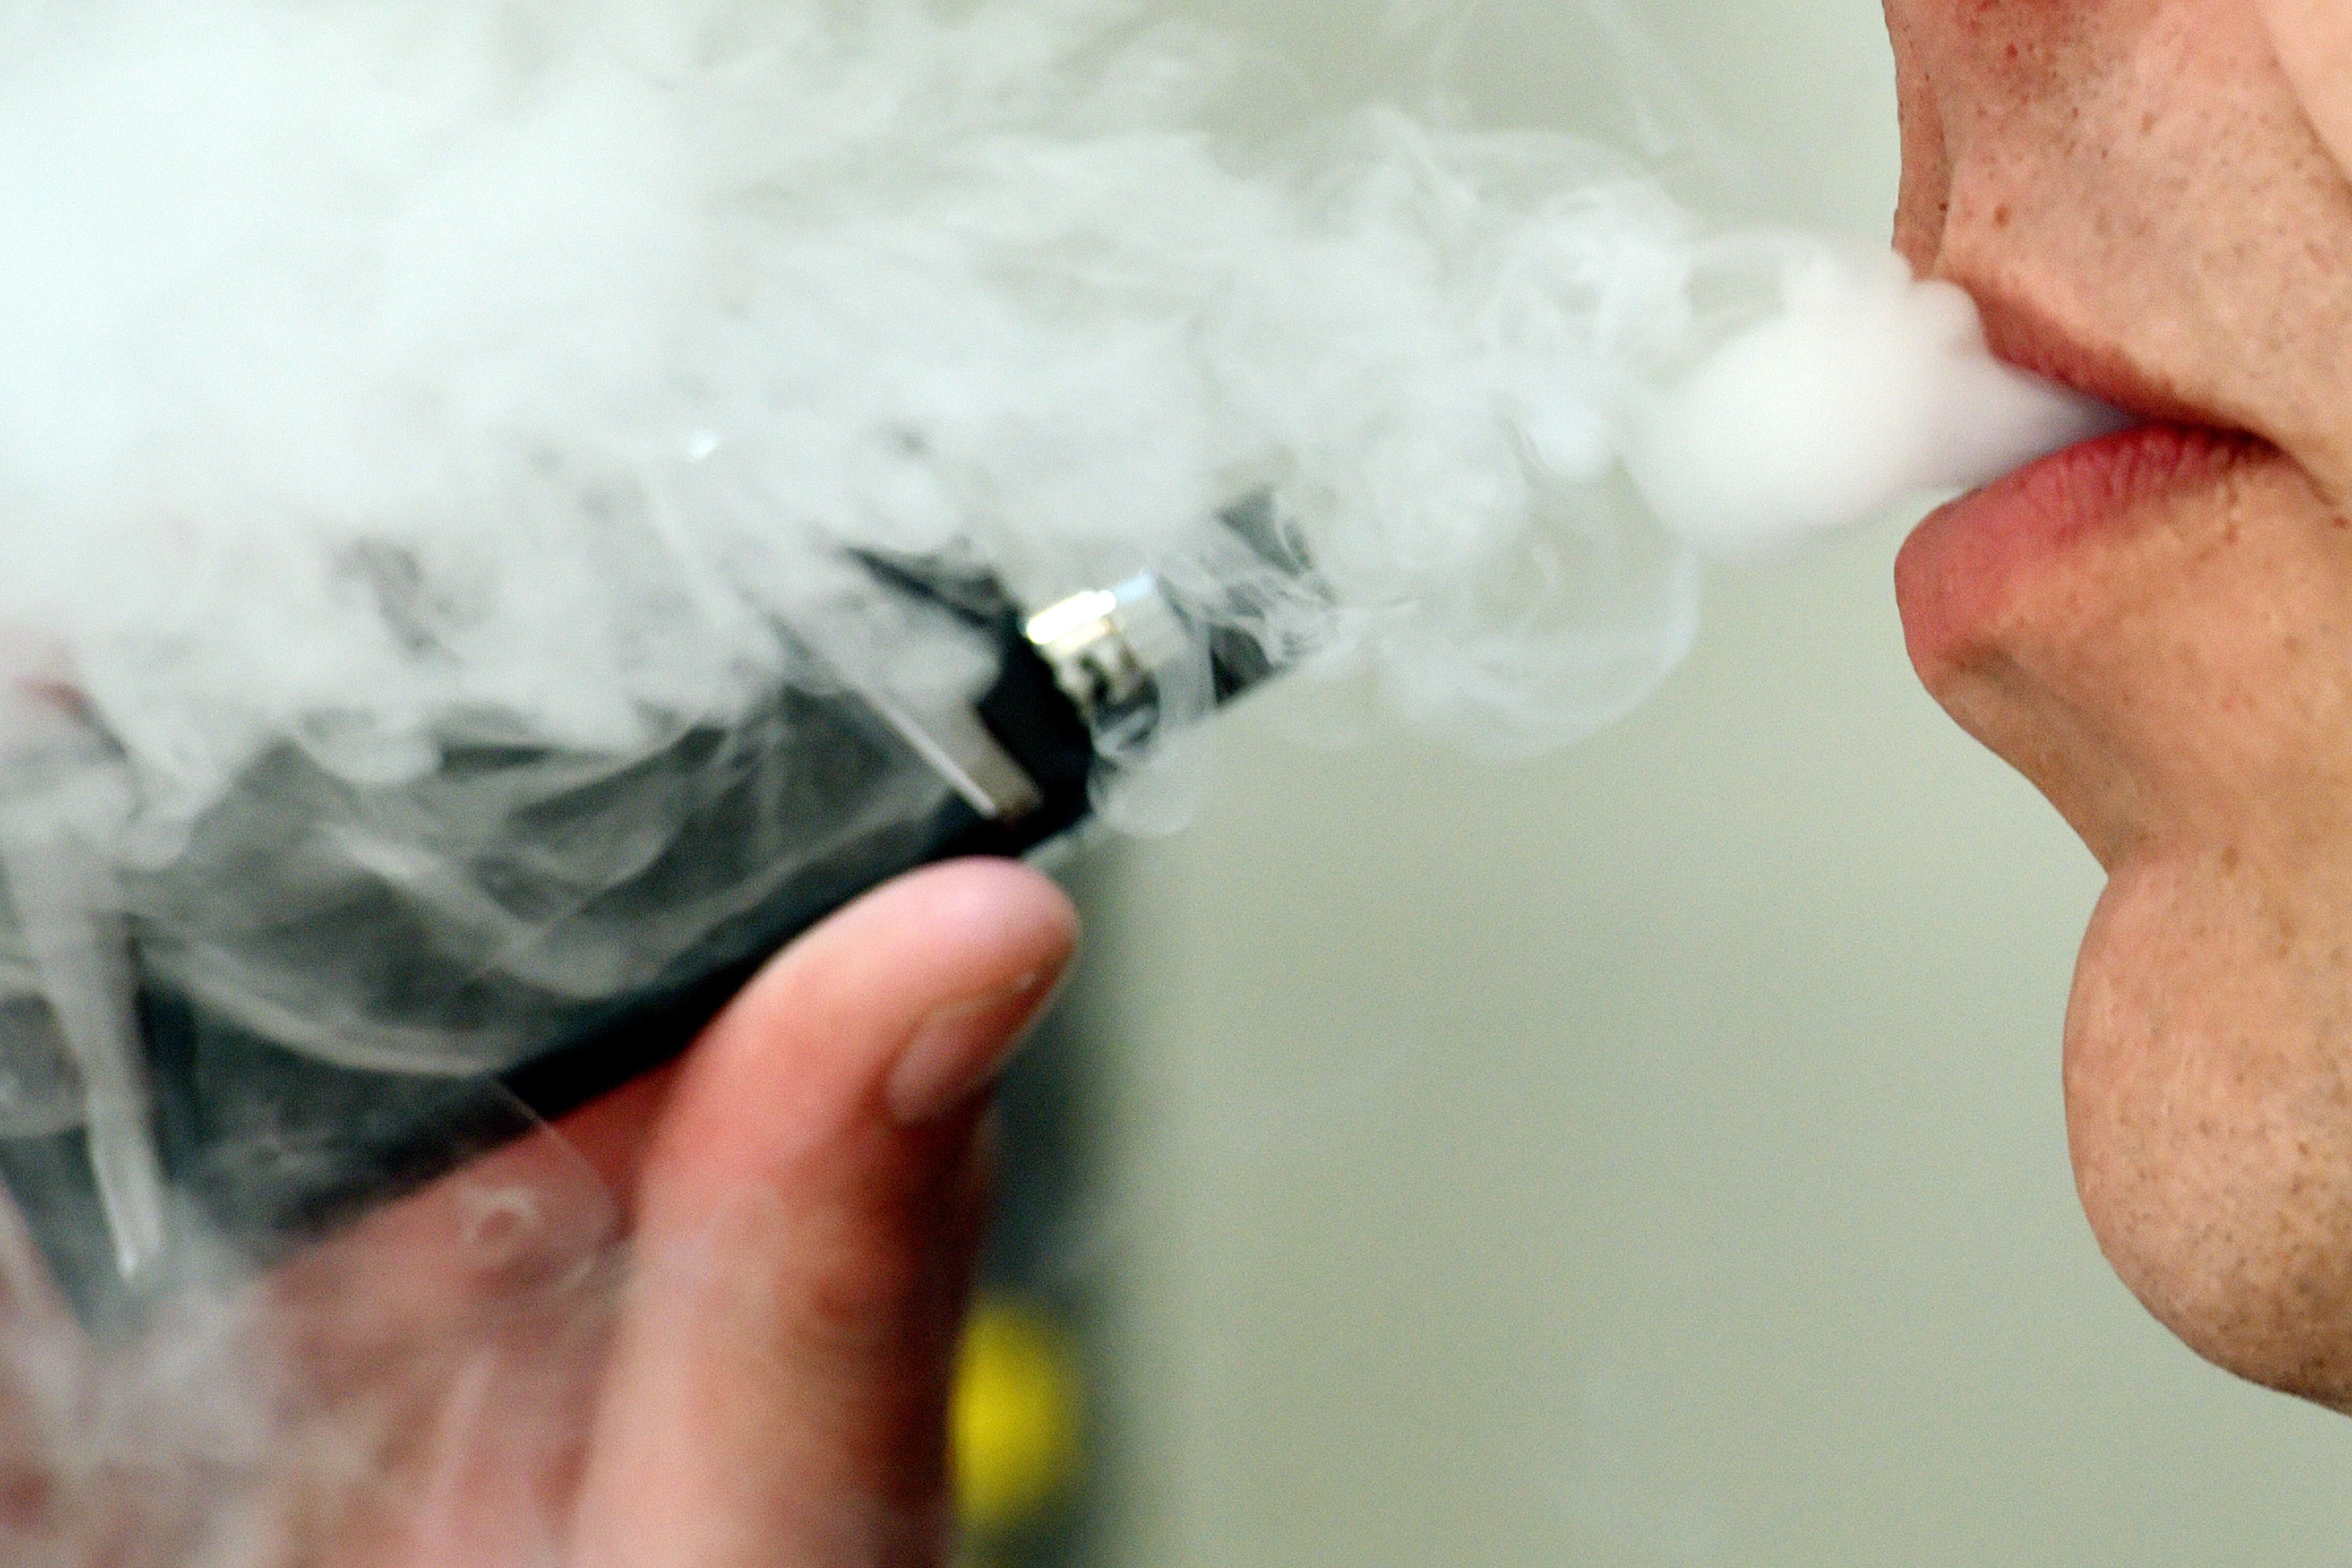 The study found that people who used e-cigarettes were at increased risk of heart failure